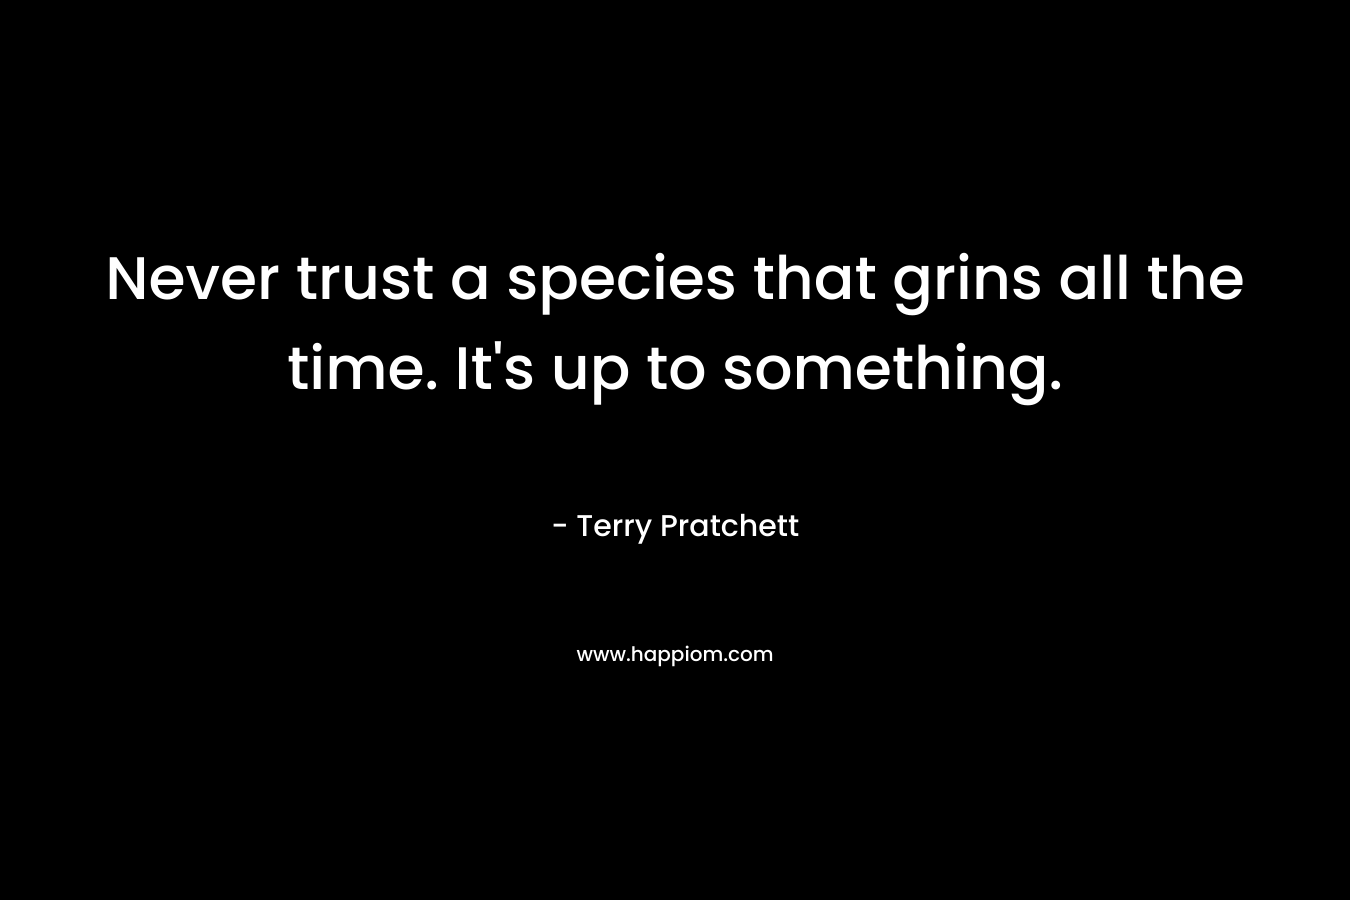 Never trust a species that grins all the time. It’s up to something. – Terry Pratchett